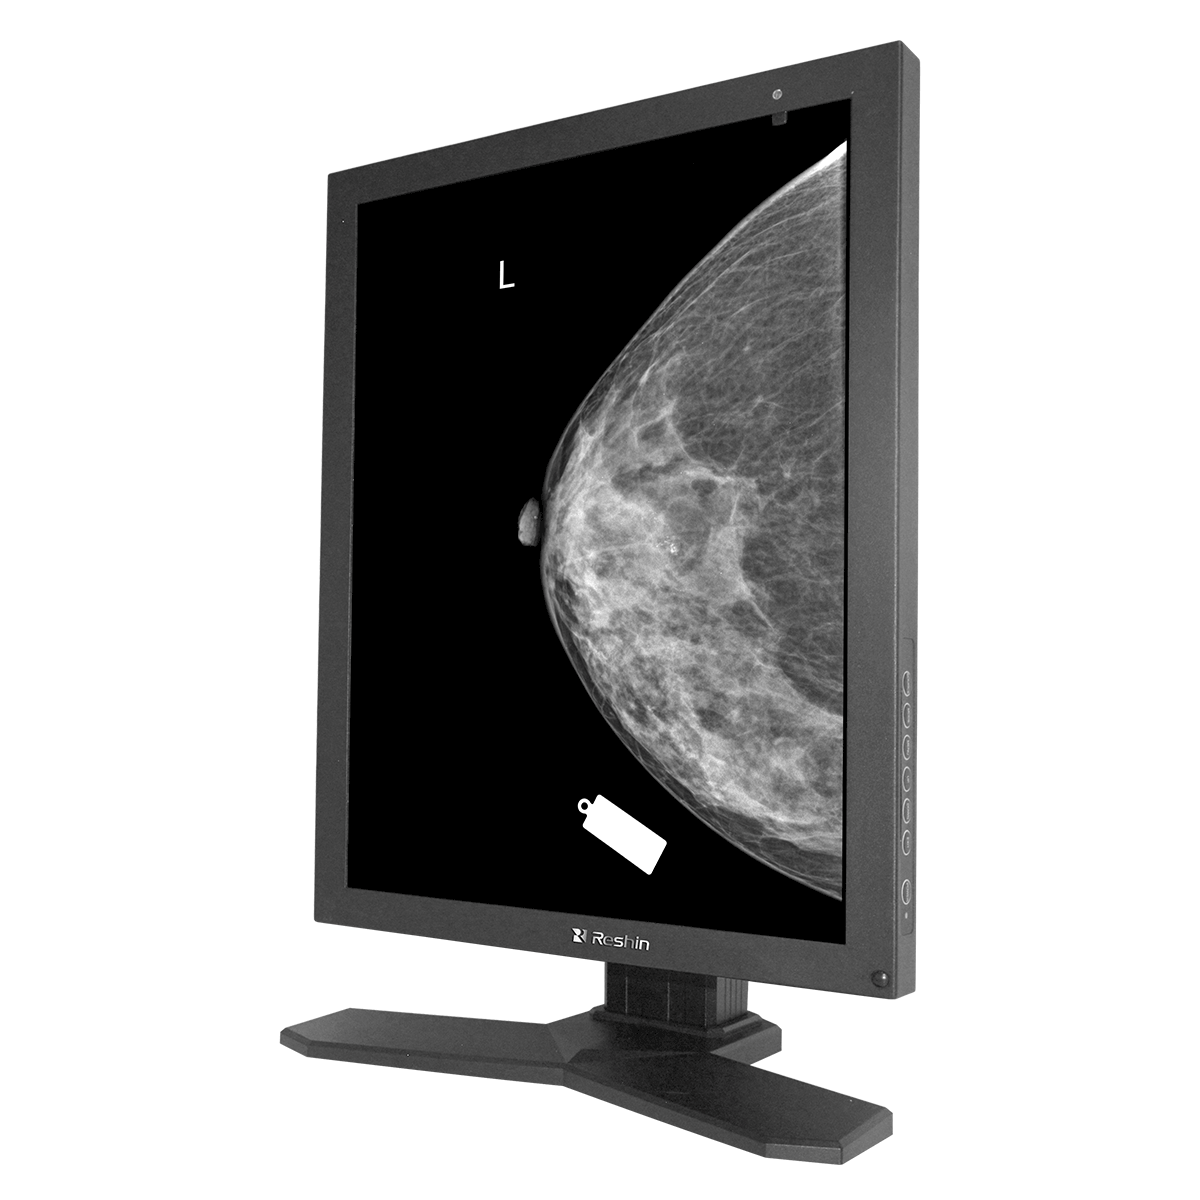 High-precision 5MP medical monitor for mammography